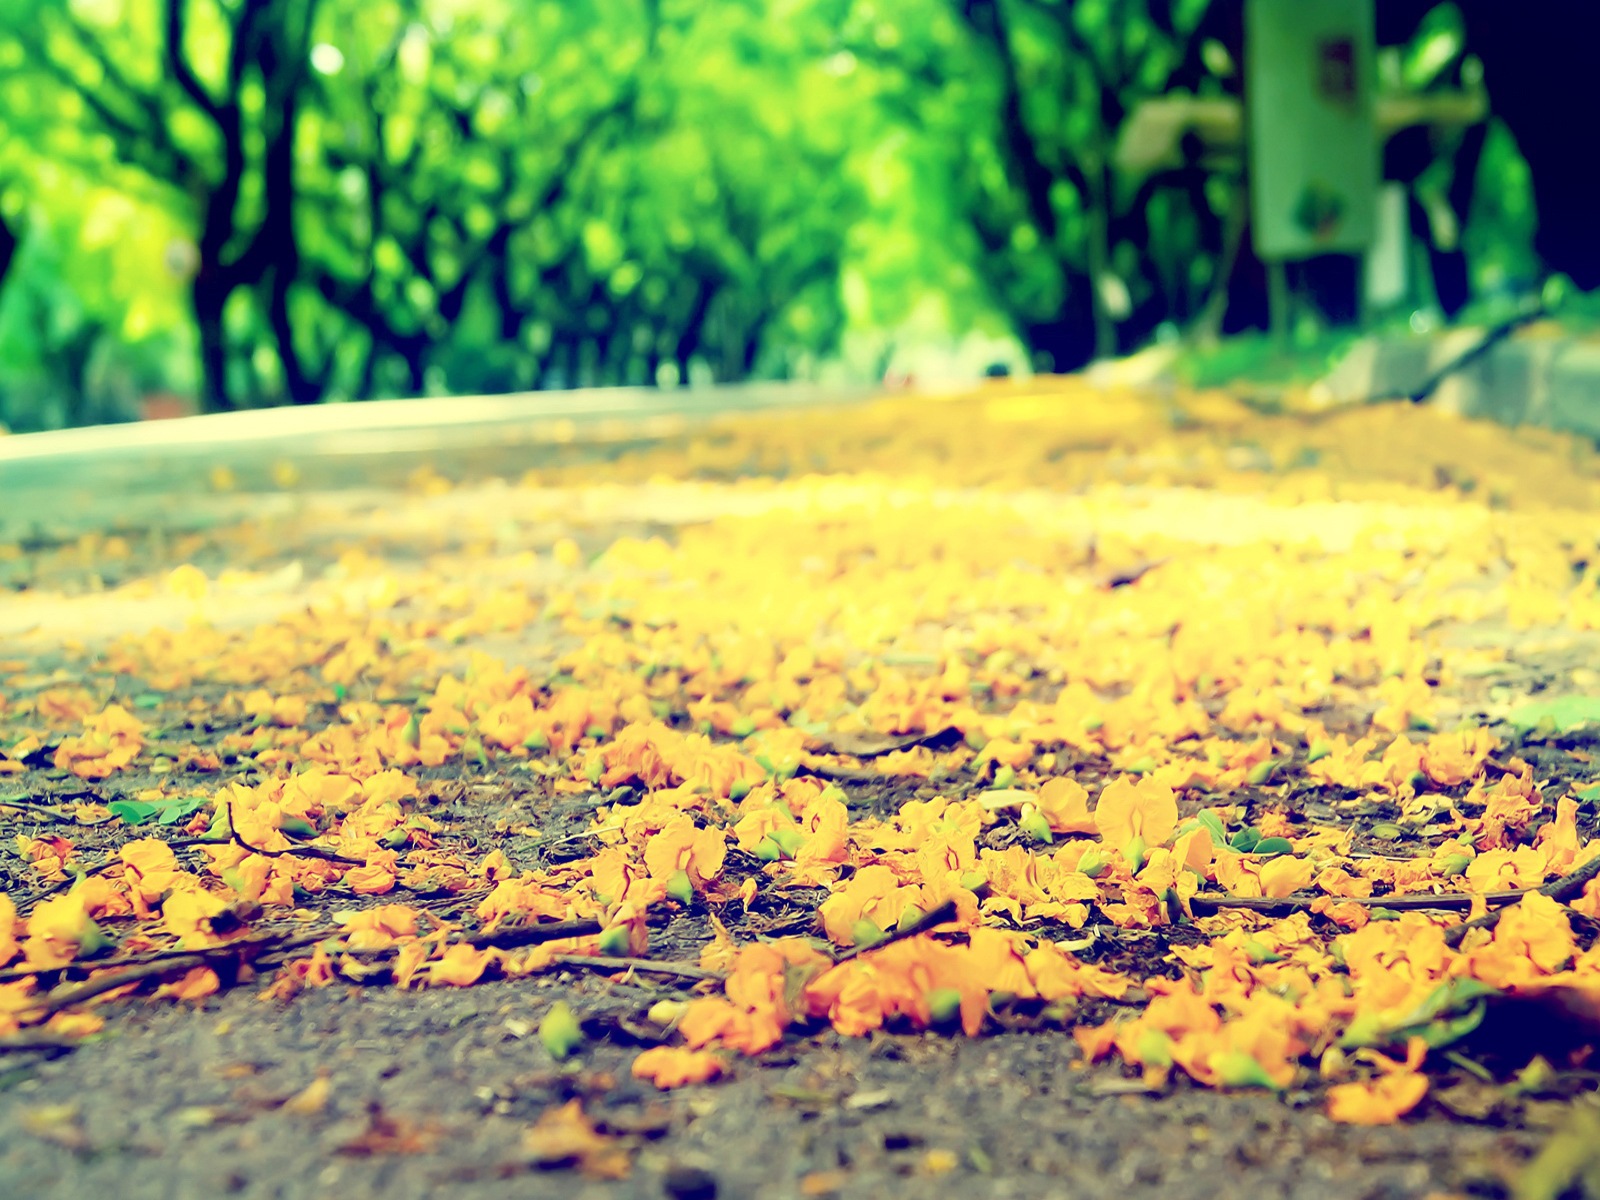 Flowers fall on ground, beautiful HD wallpapers #3 - 1600x1200